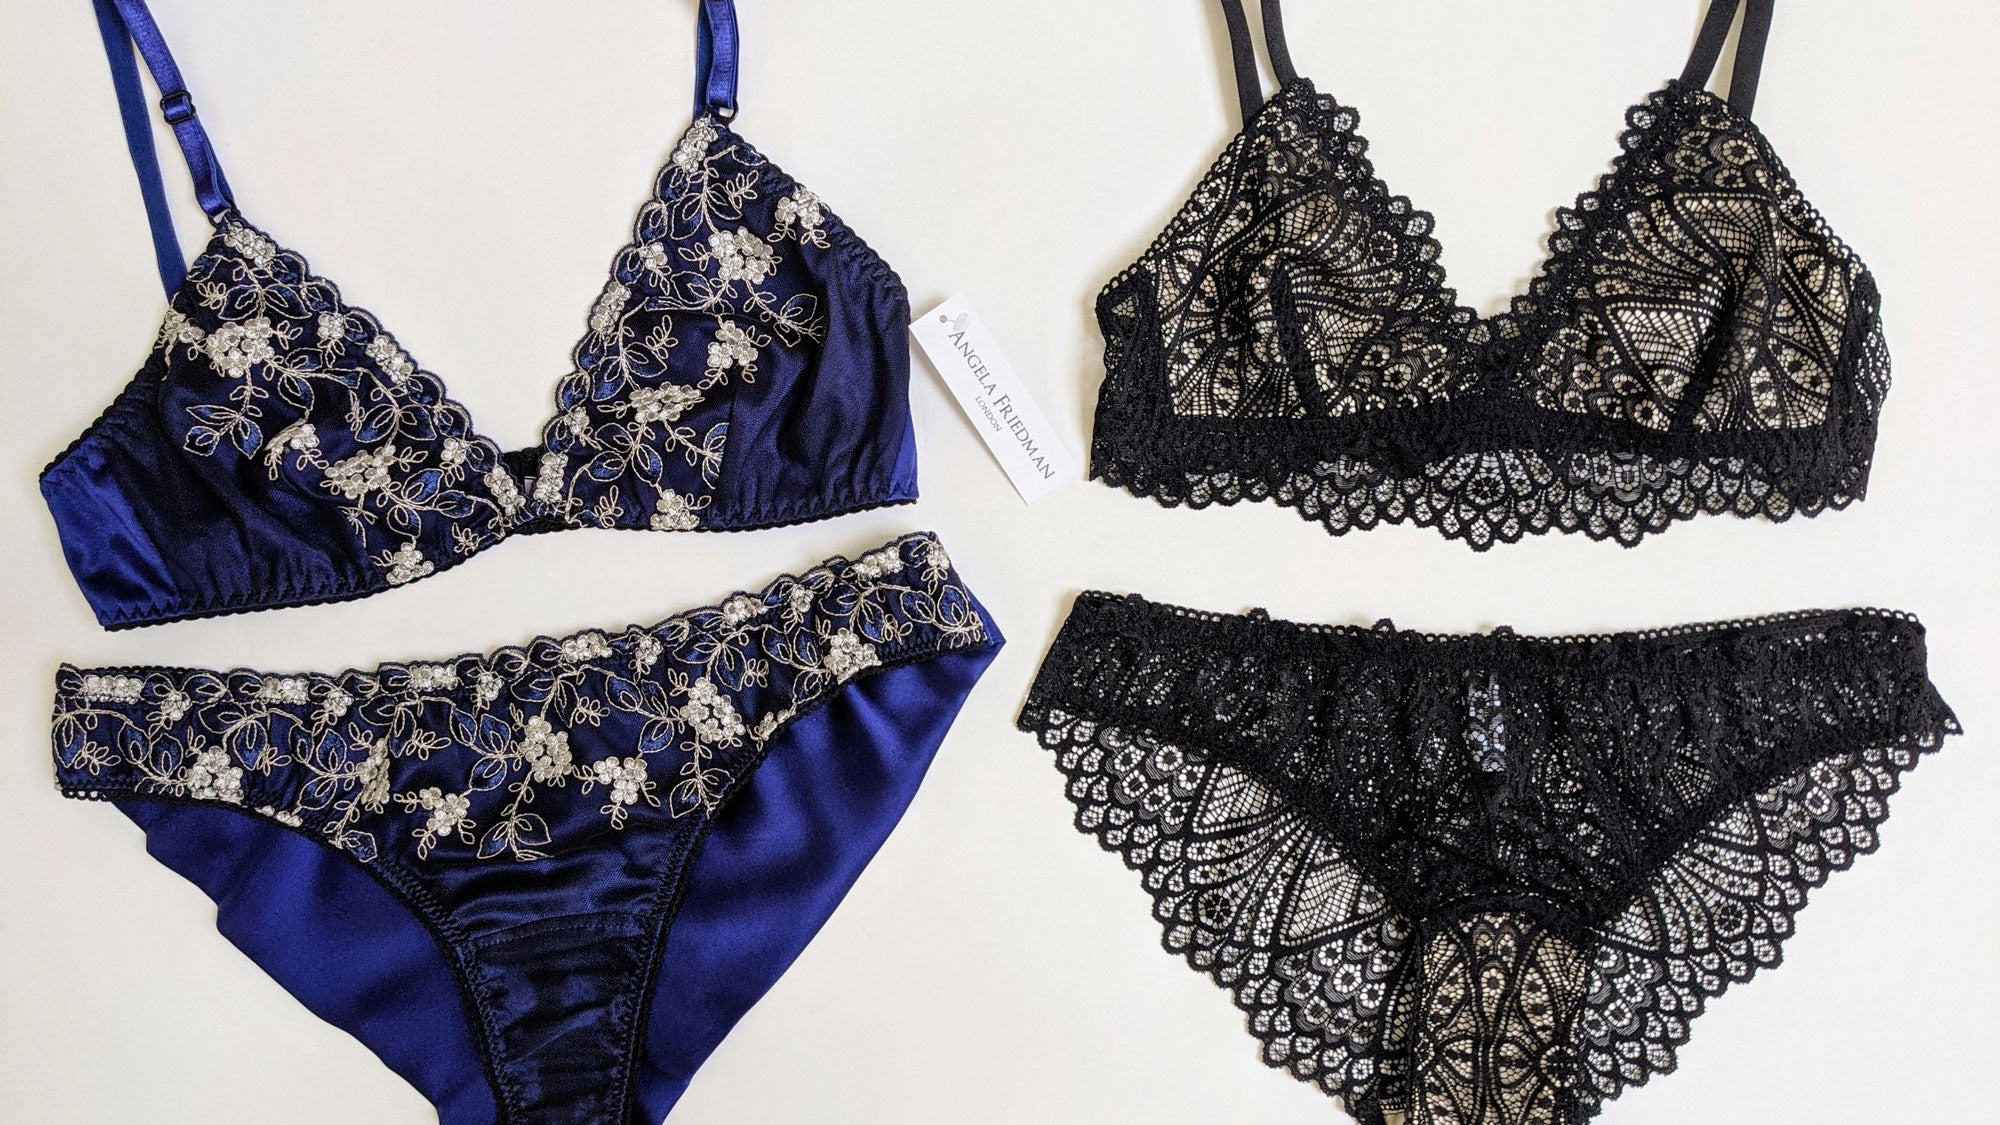 What's the difference between embroidered and lace lingerie?